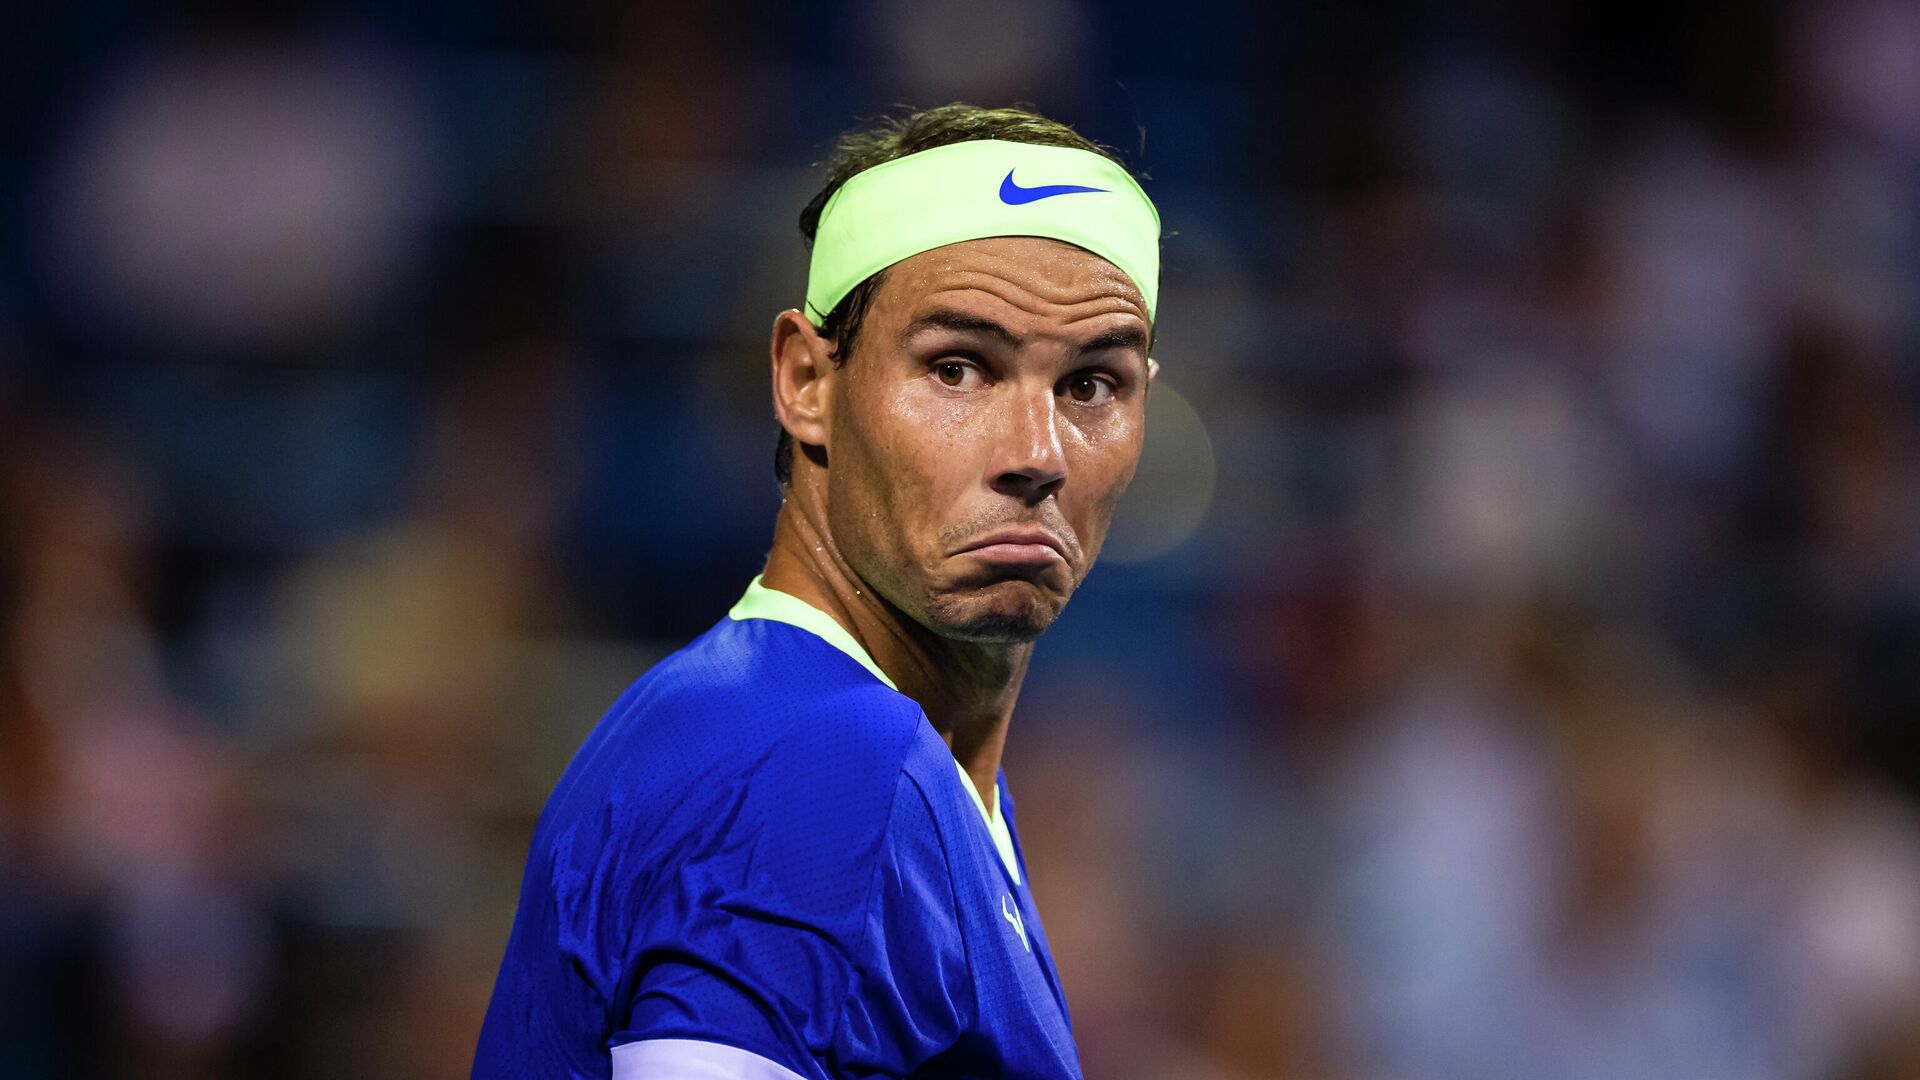 Aug 5, 2021; Washington, DC, USA; Rafael Nadal of Spain reacts after a play against Lloyd Harris of South Africa (not pictured) during the Citi Open at Rock Creek Park Tennis Center. Mandatory Credit: Scott Taetsch-USA TODAY Sports - РИА Новости, 1920, 11.08.2021